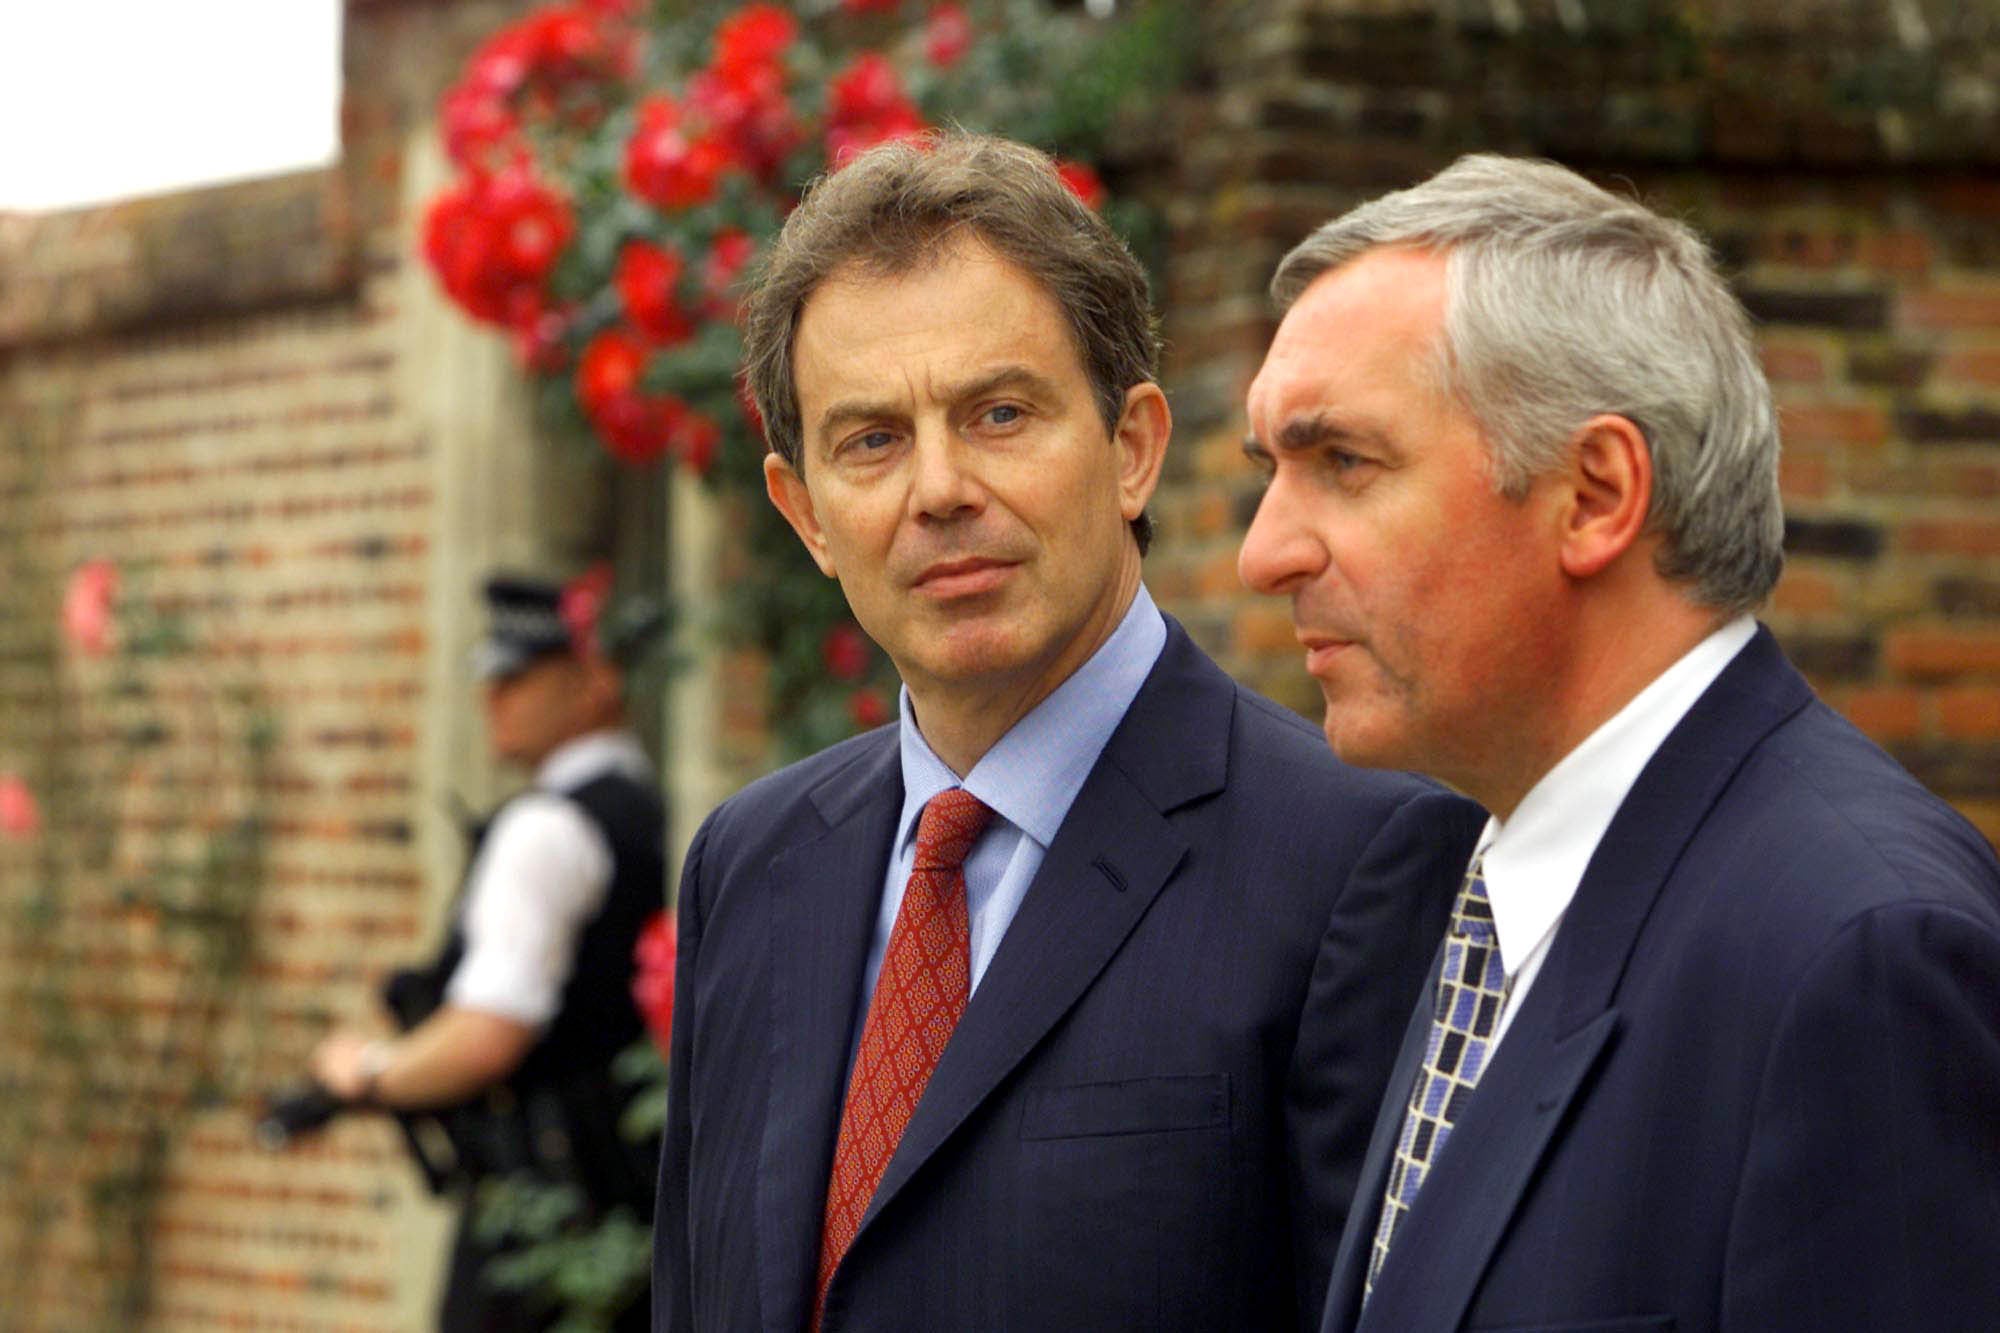 British prime minister Tony Blair, centre, and his Irish counterpart Bertie Ahern talk to the media at Chequers, near Aylesbury (PA Archive)